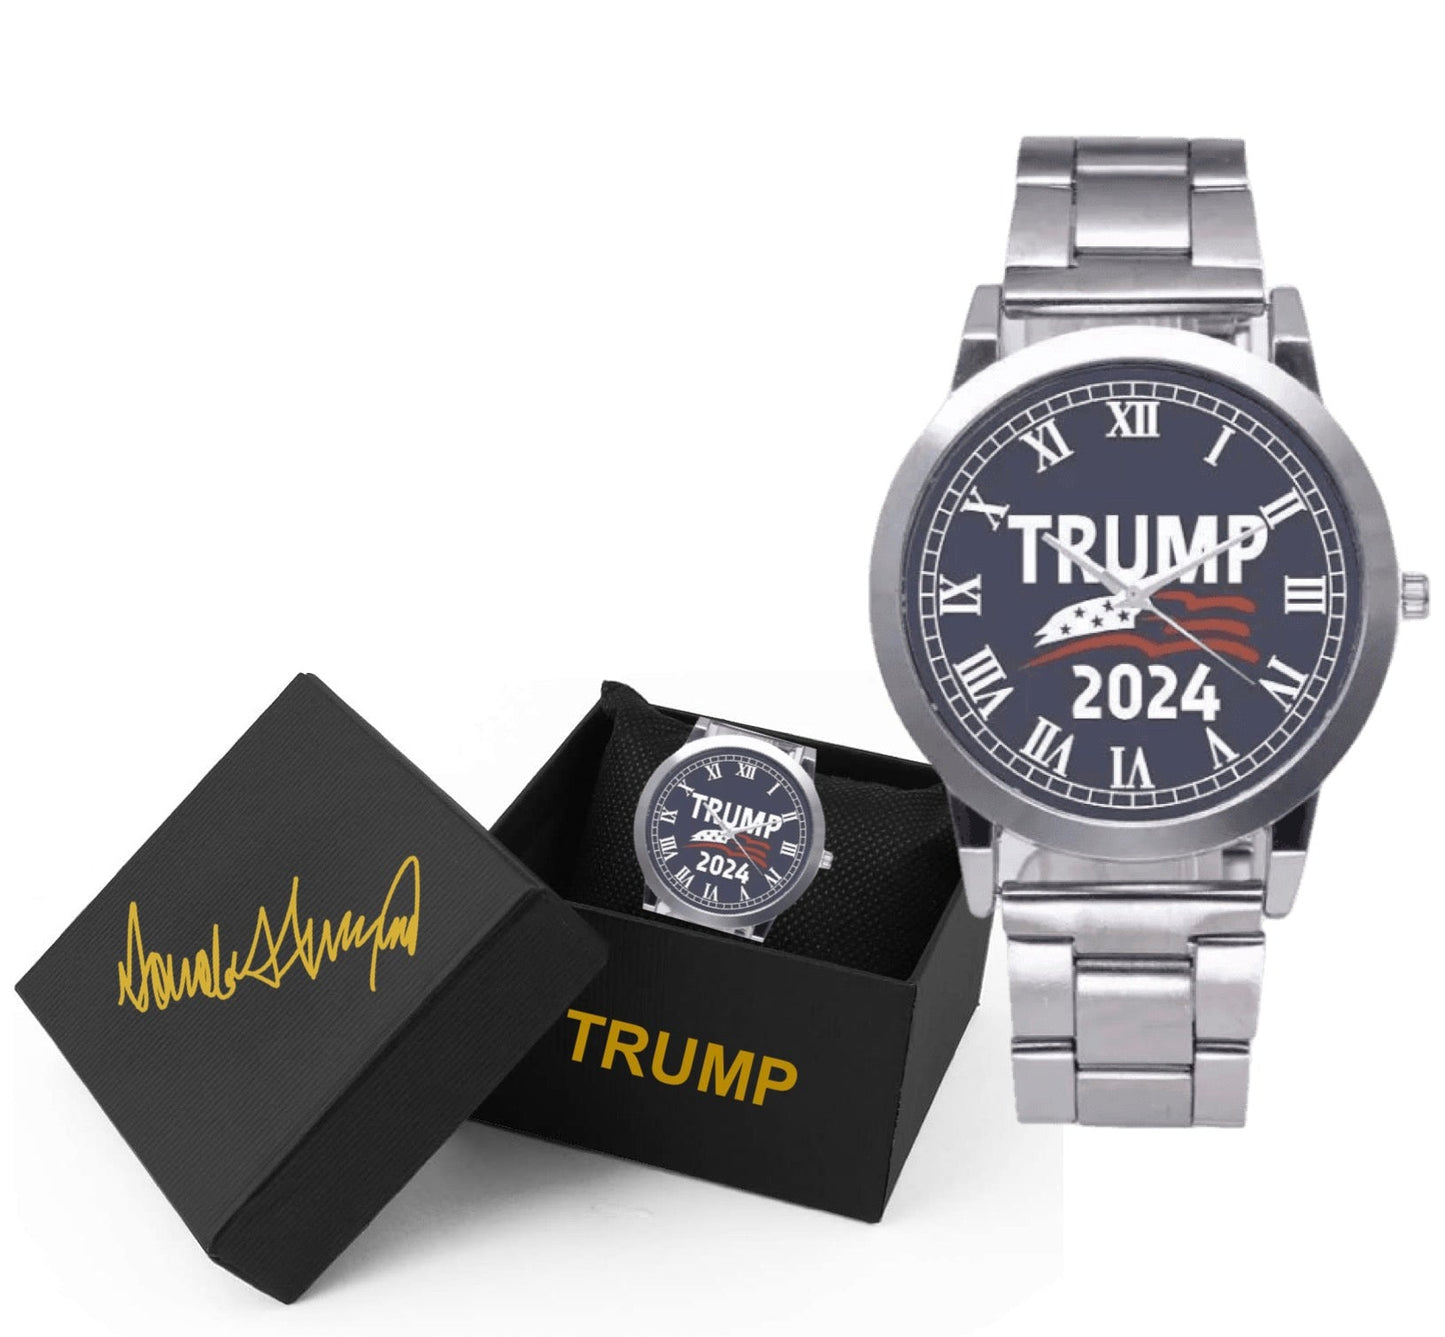 Official President Trump 2024 Watch, Autographed Box Replica! (FREE Shipping)